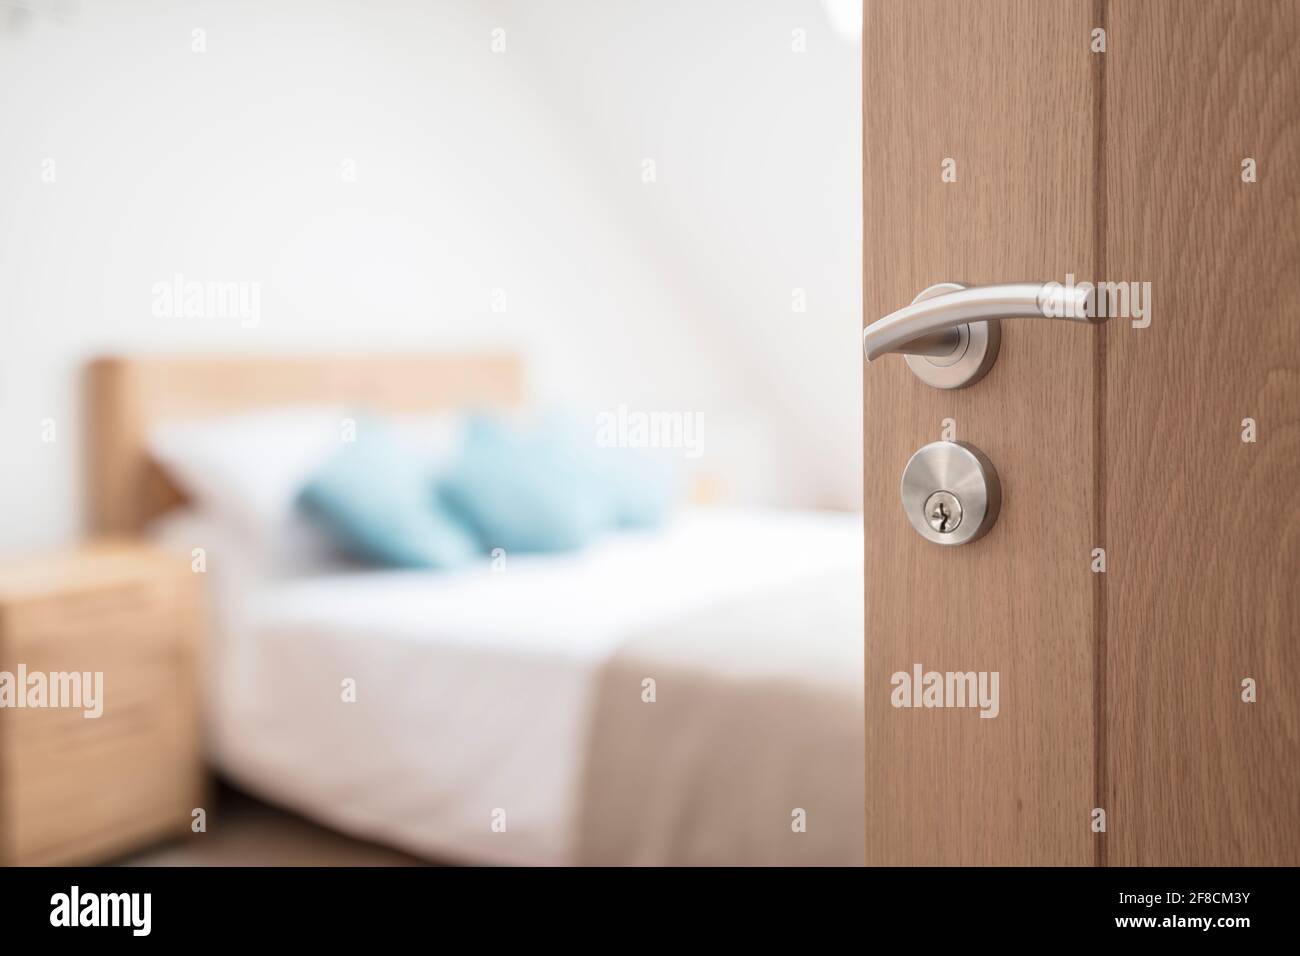 Hotel room or apartment doorway with key and keyring key fob in open door and bedroom in background Stock Photo